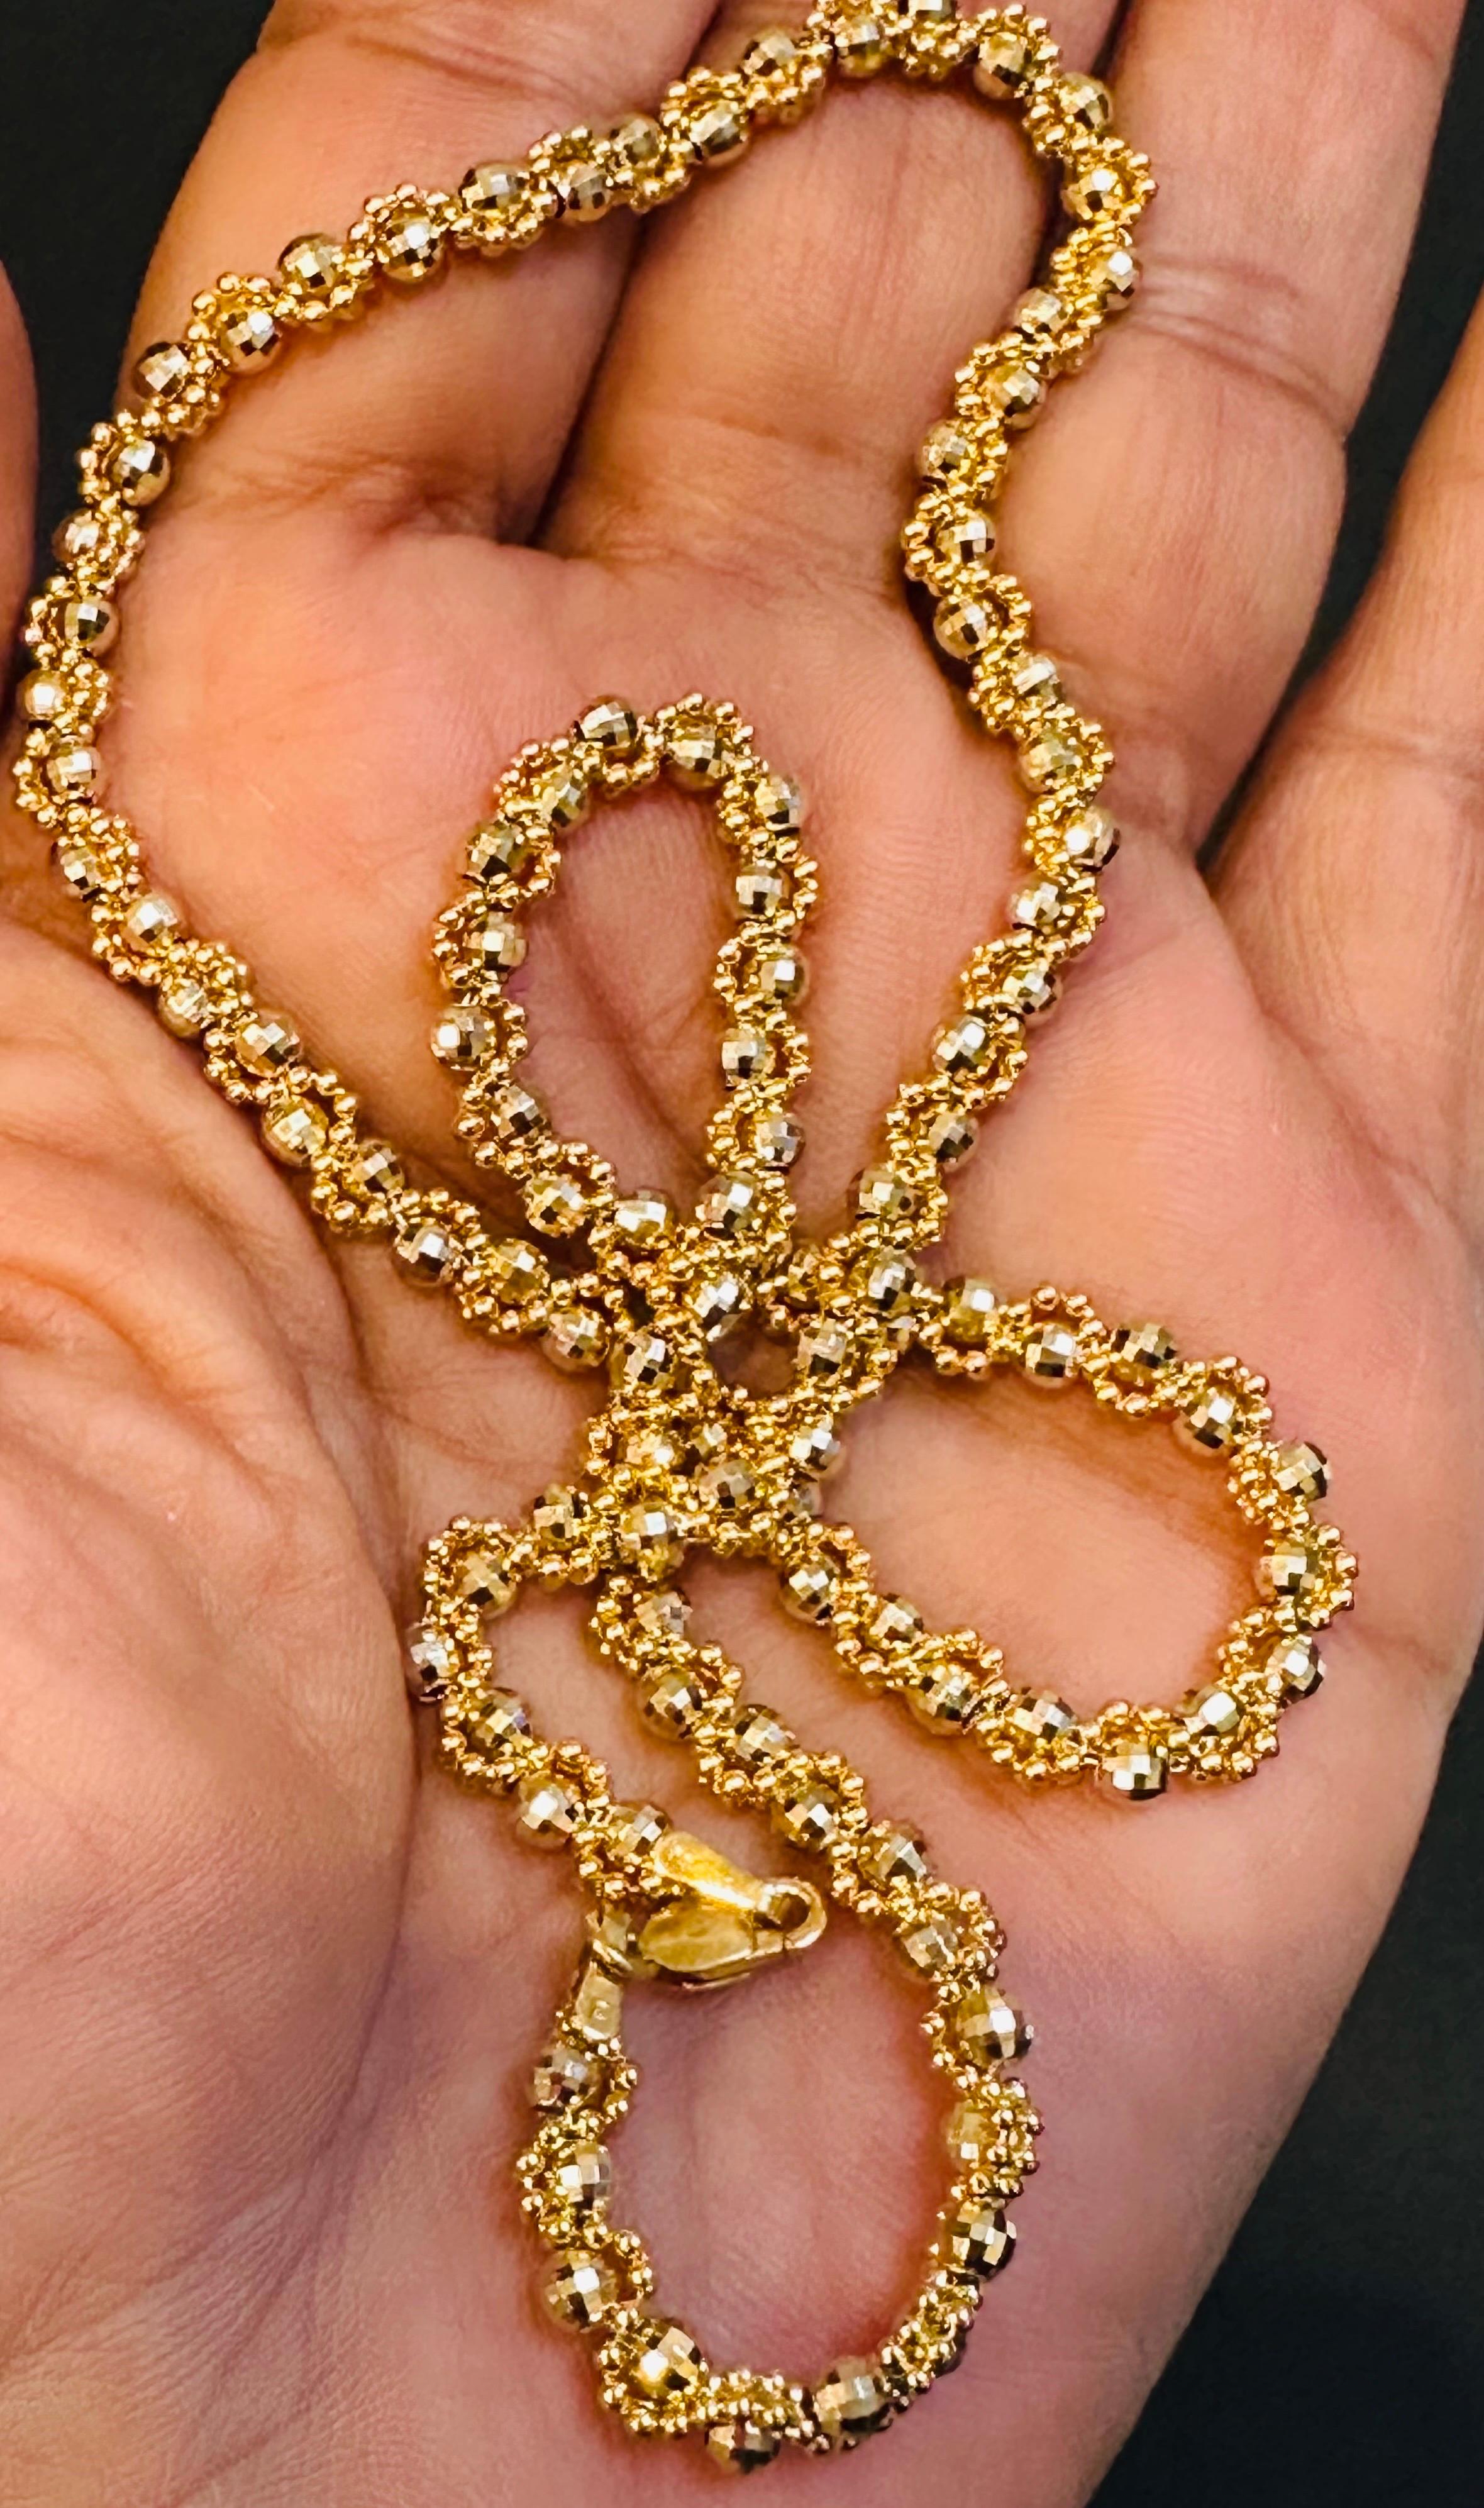 Vintage 14 Karat Yellow Gold 13 Gm, Twisted Chains with Balls in Between In Excellent Condition For Sale In New York, NY